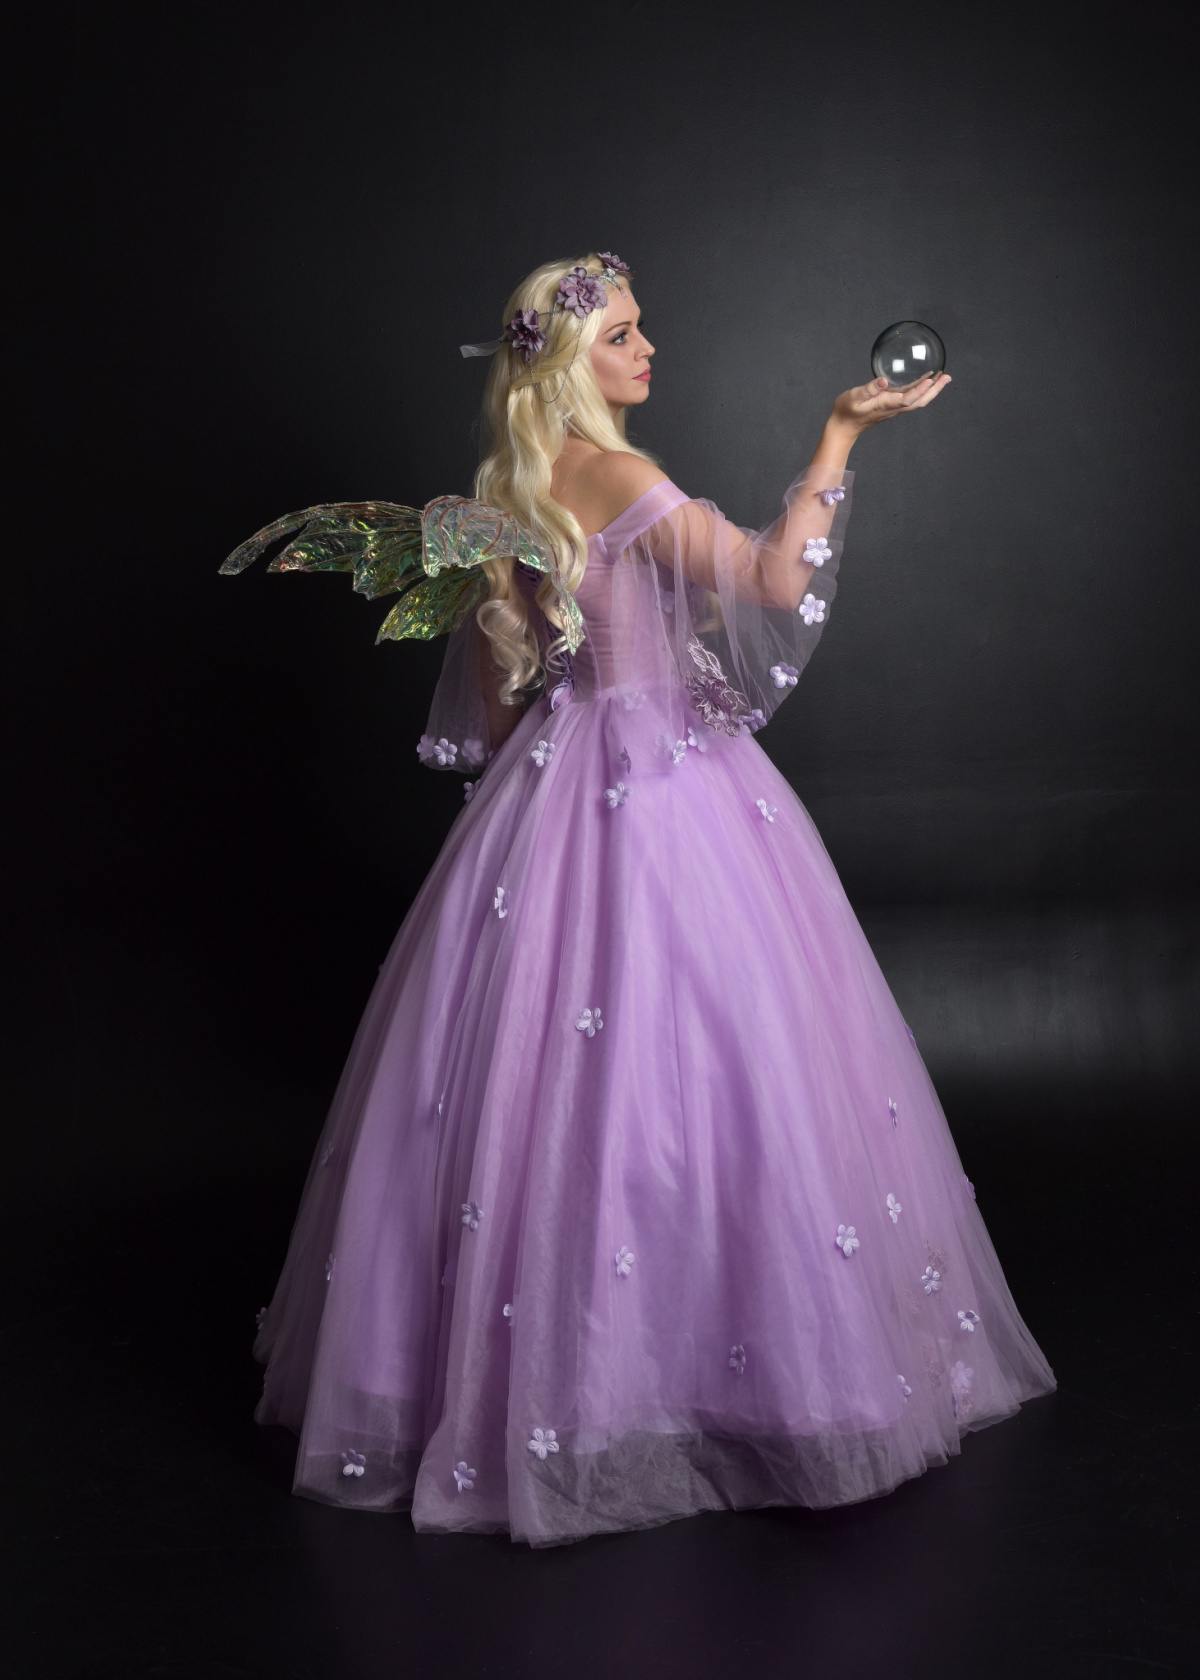 A blonde woman wearing a diy fairy costume that's a purple dress, with faerie wings, and a flower crown holding a crystal ball.